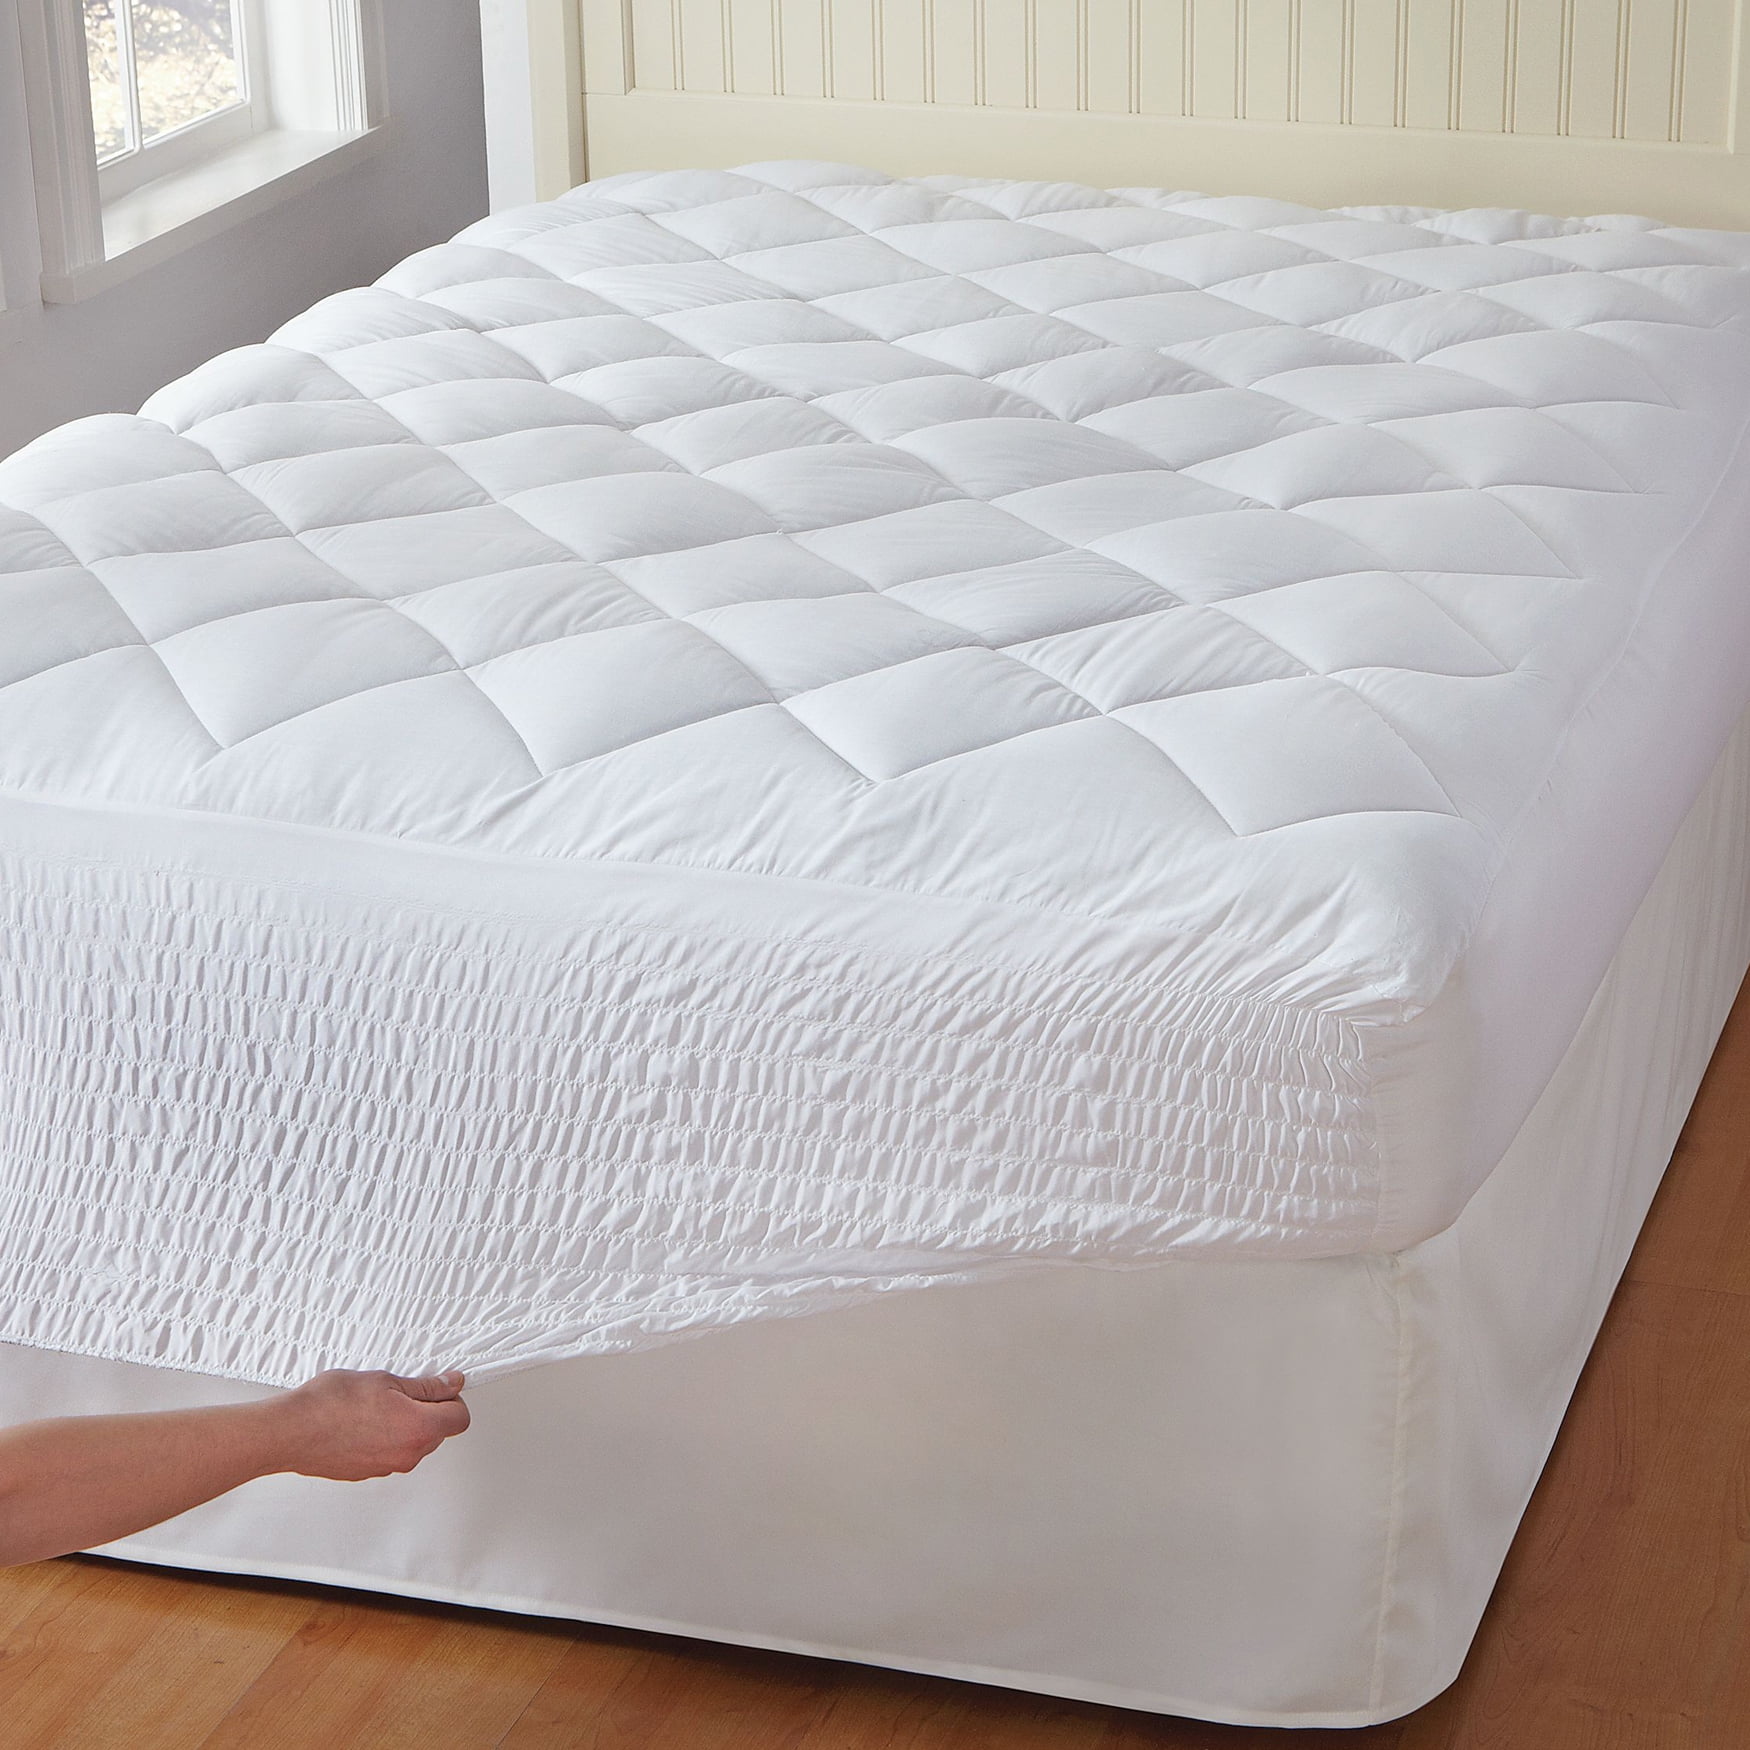 Super Soft Cover Protector Mellanni Microplush Mattress Pad Overfilled Topper 